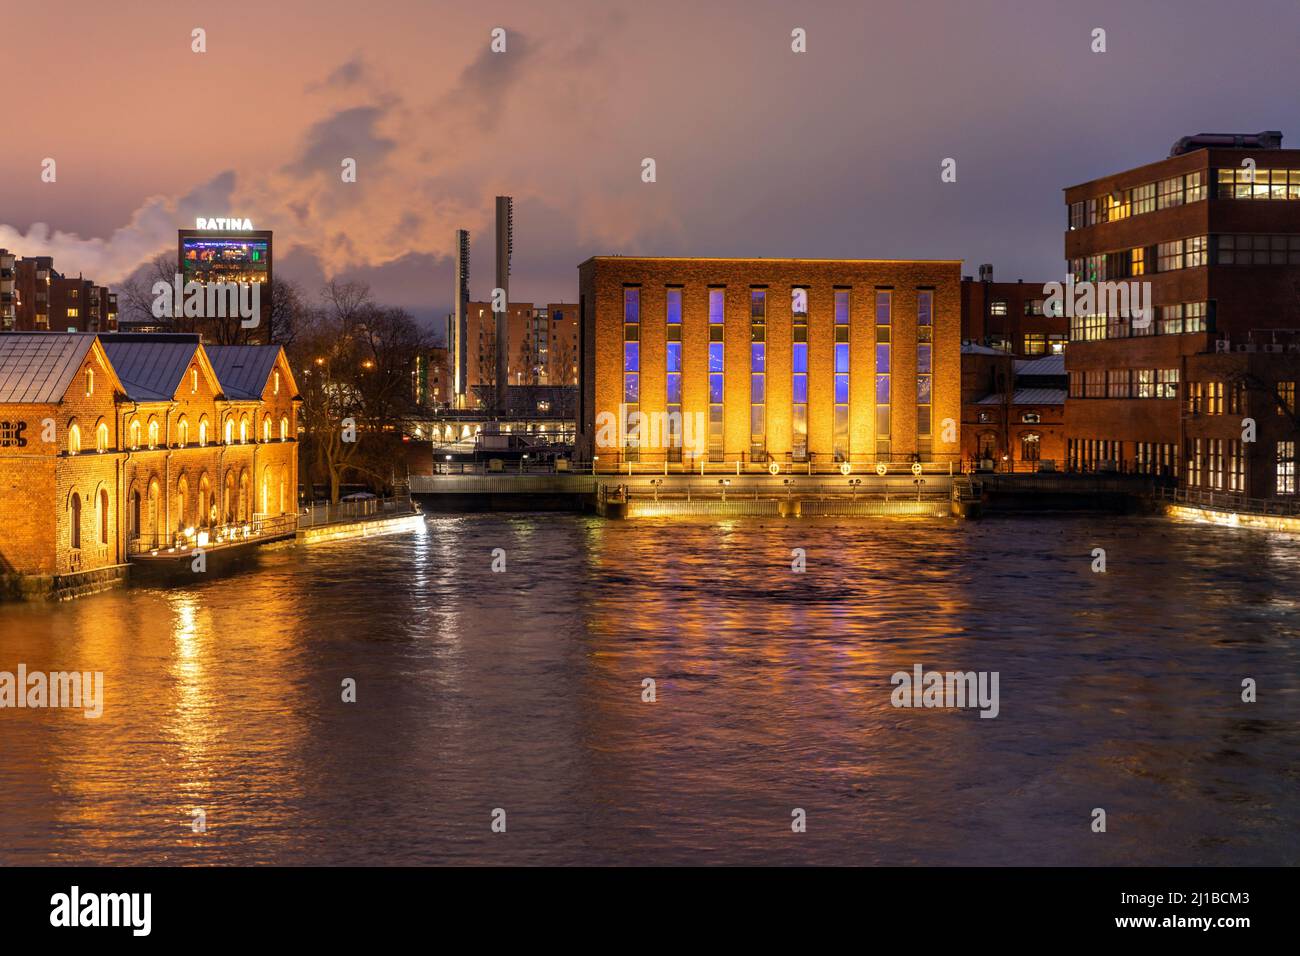 ELECTRIC PLANT ON THE TAMMERKOSKI RIVER, NIGHT LIGHTING, TAMPERE, FINLAND, EUROPE Stock Photo